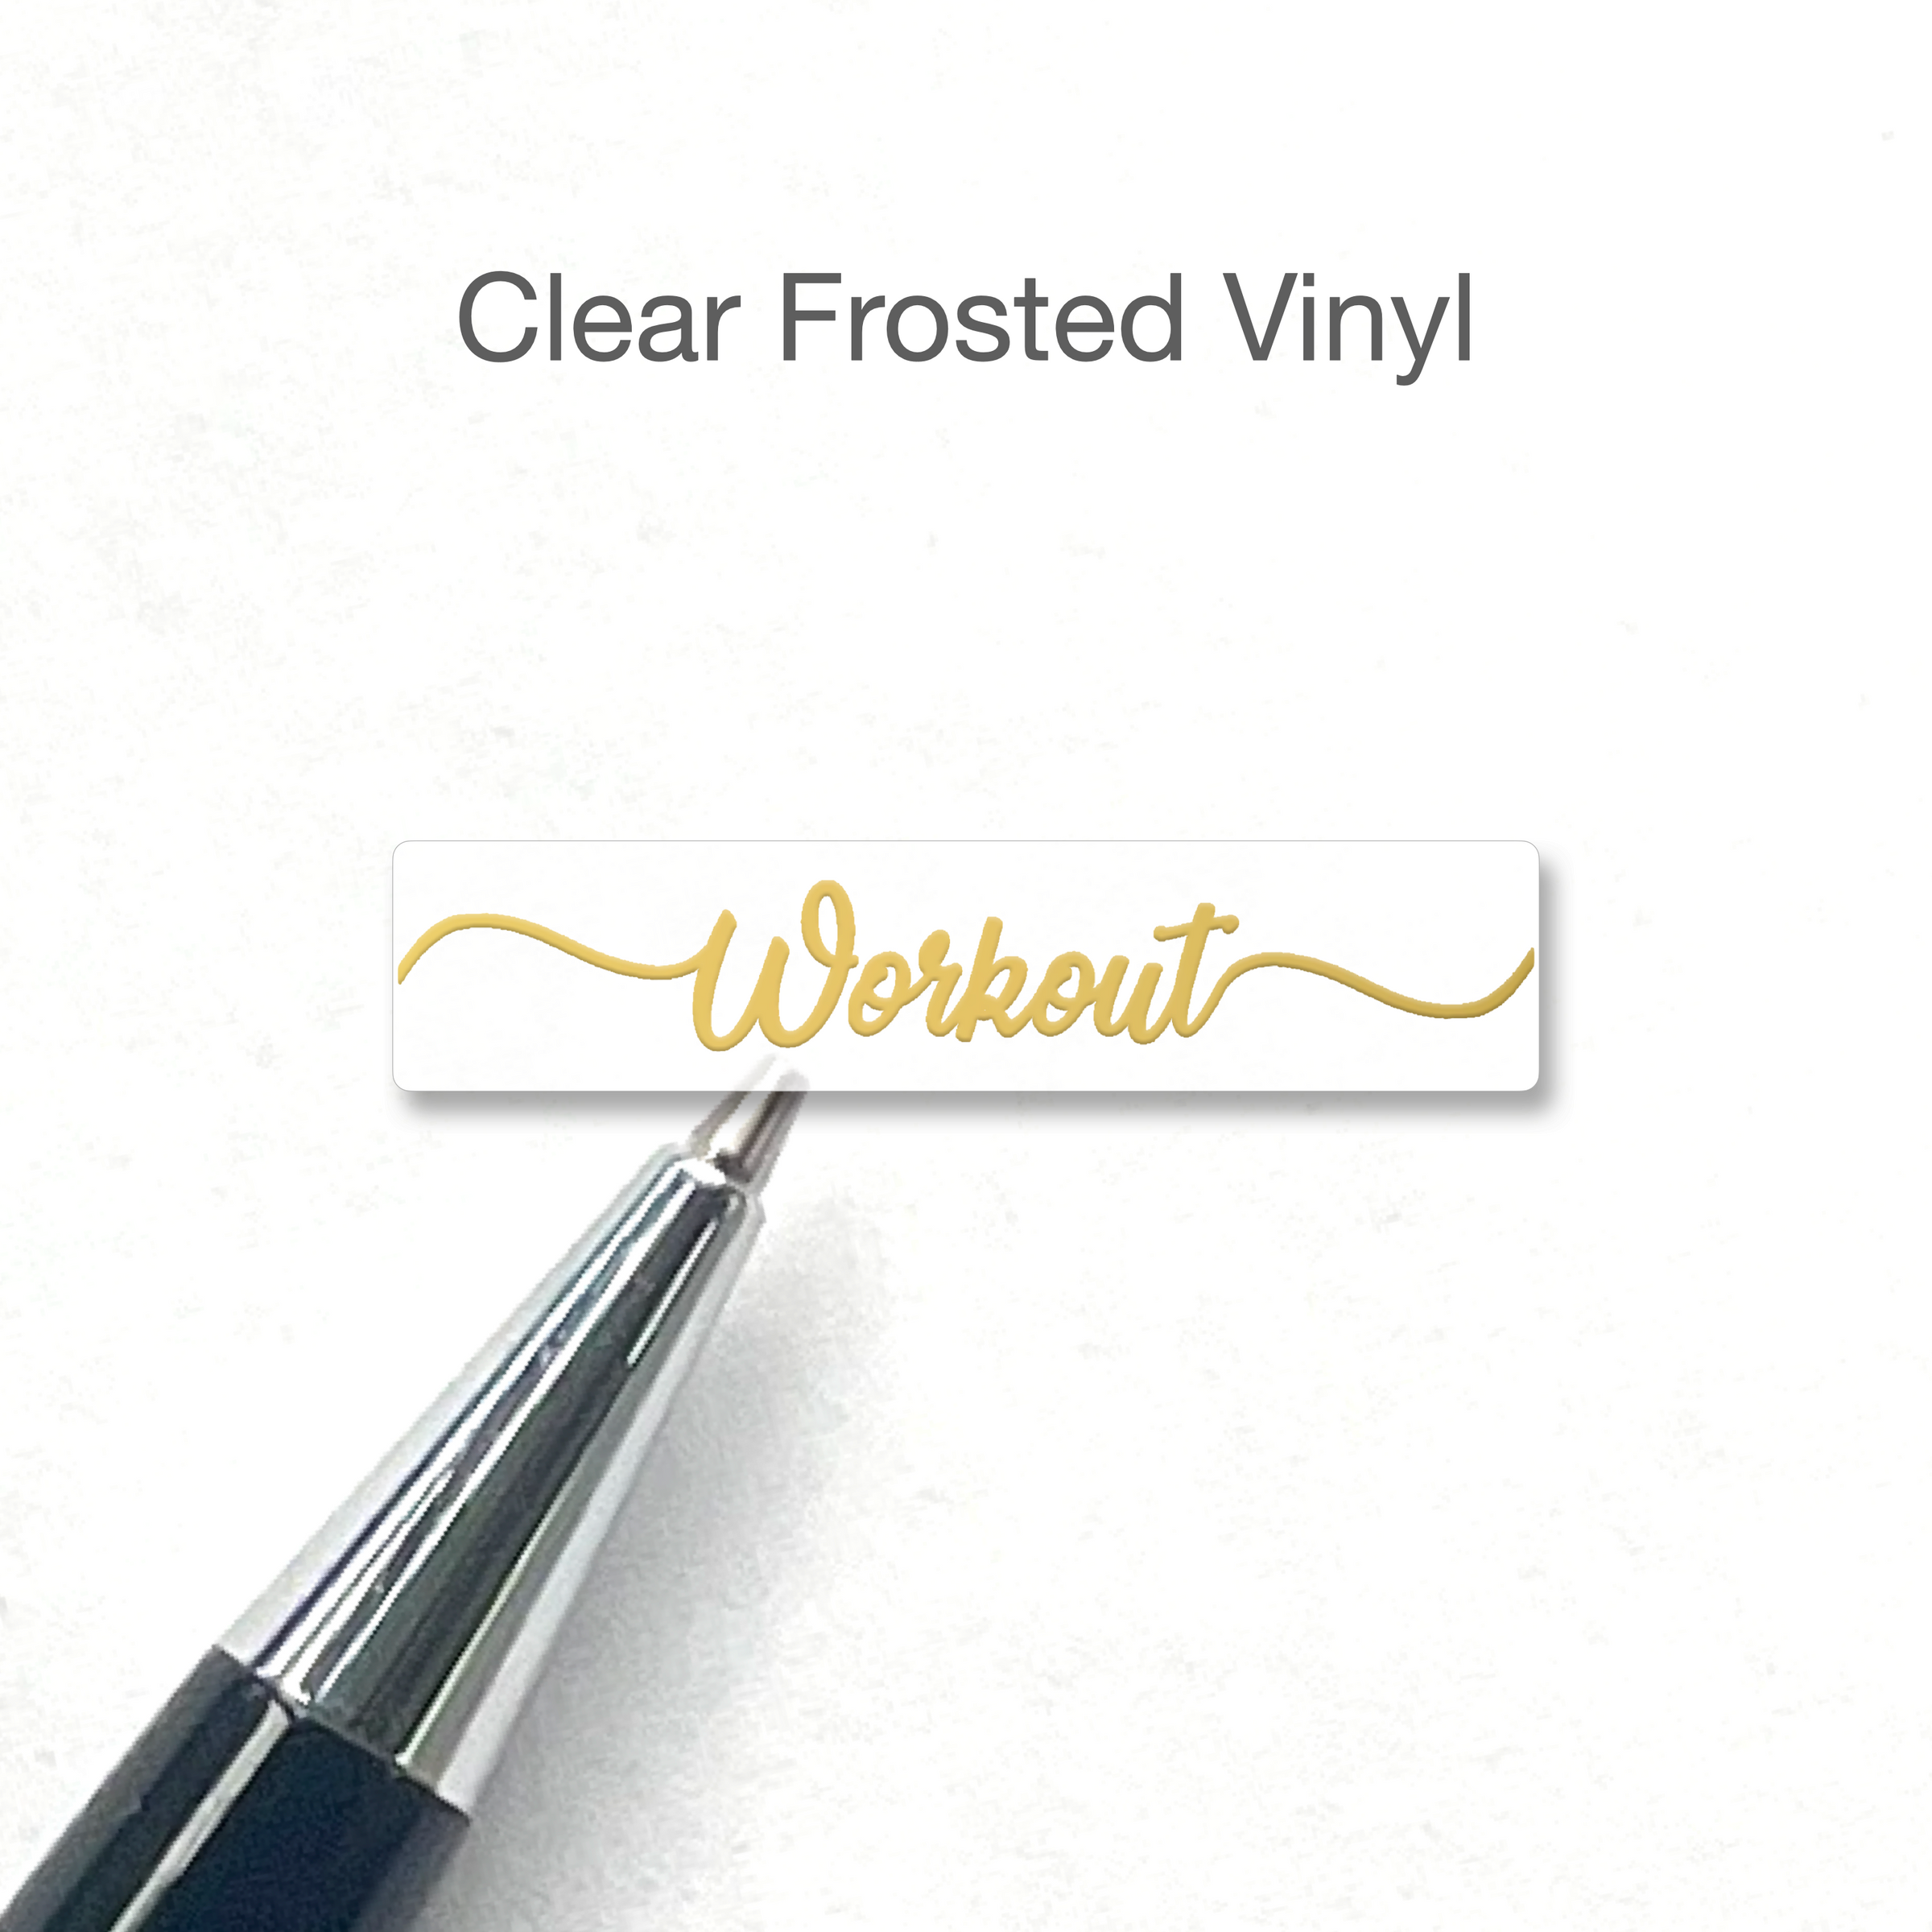 Workout Foiled Script Stickers